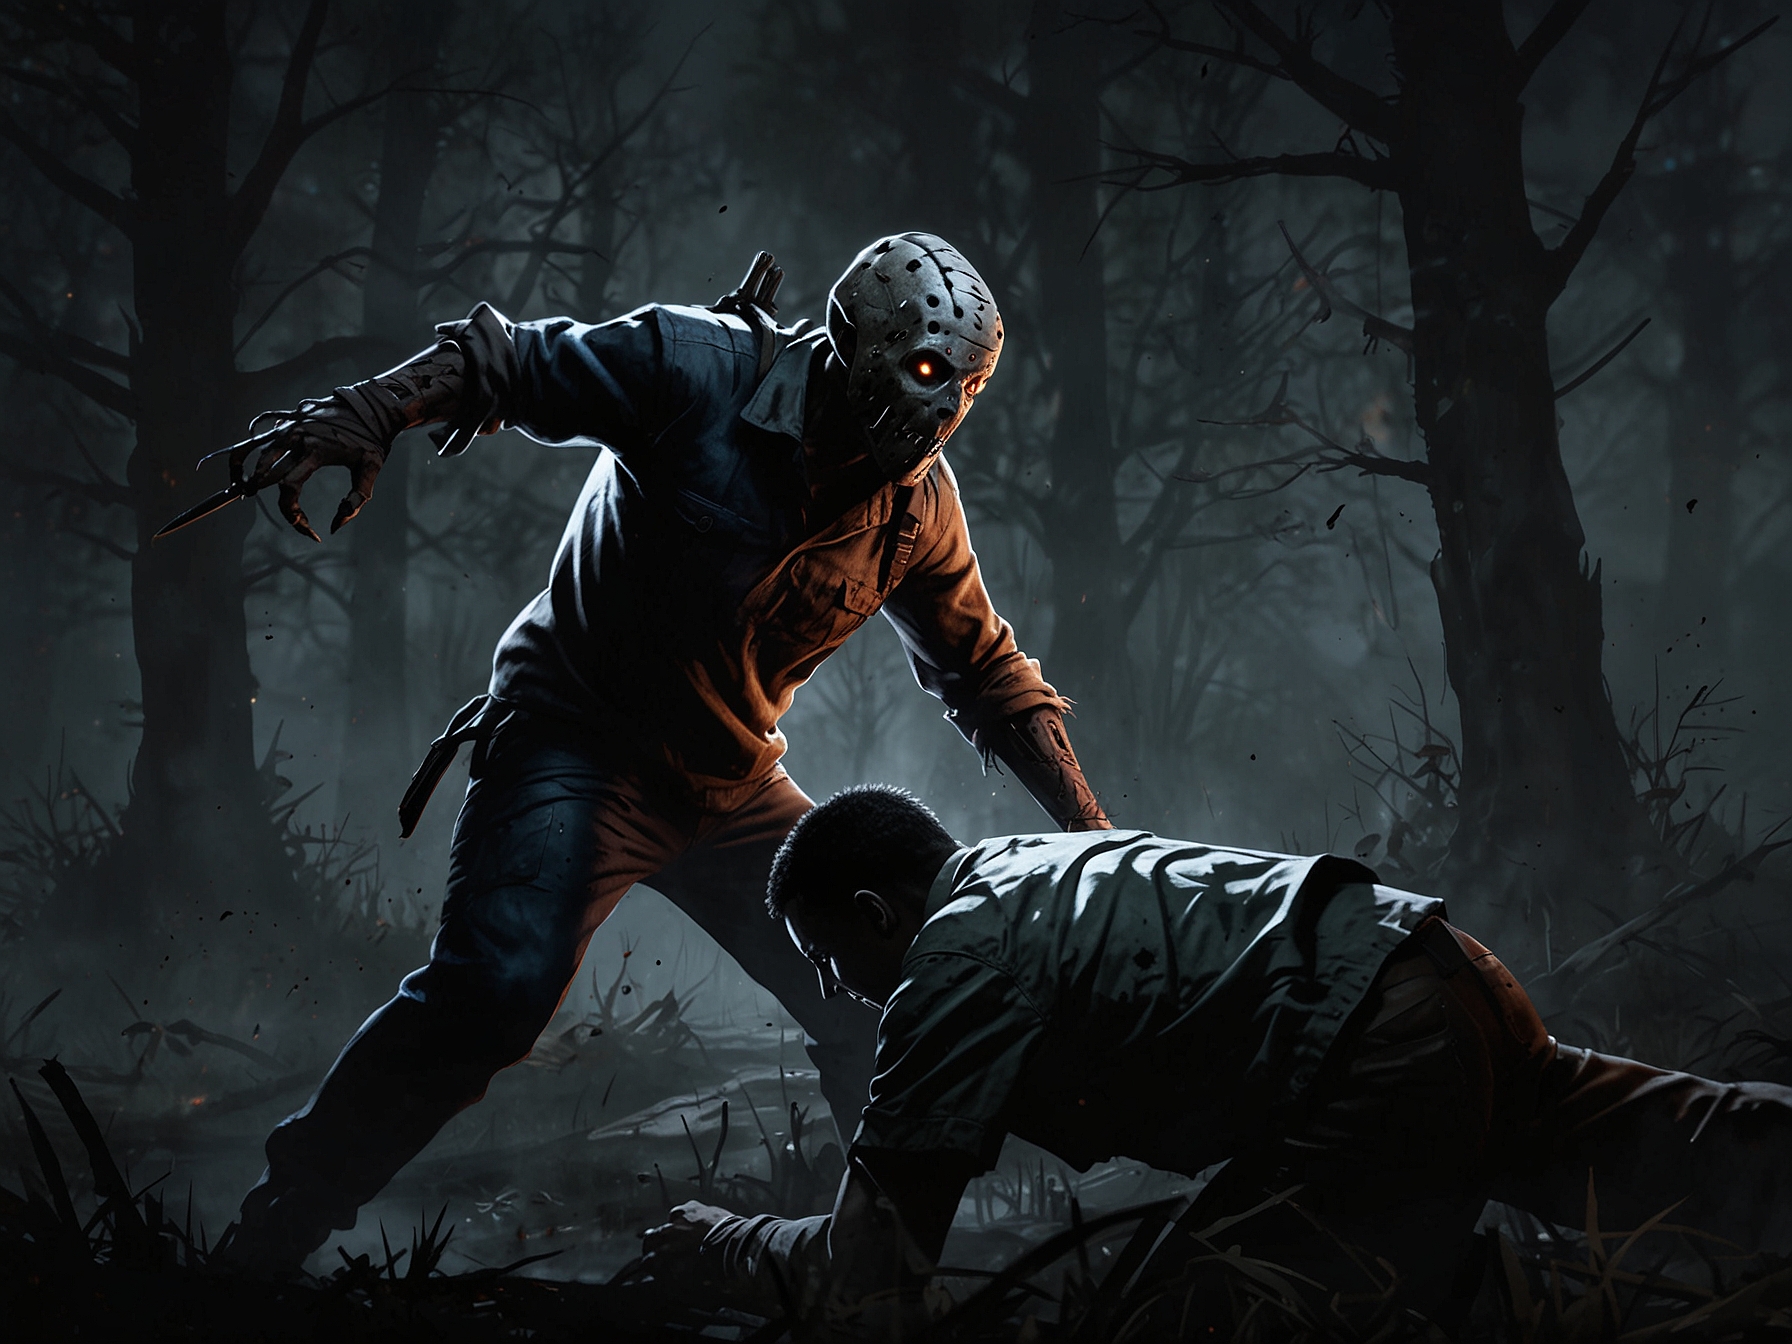 An intense moment from a Dead by Daylight match showing a Survivor struggling to escape while a Killer is nearby, illustrating the bug that led to Team Tremor's disqualification.